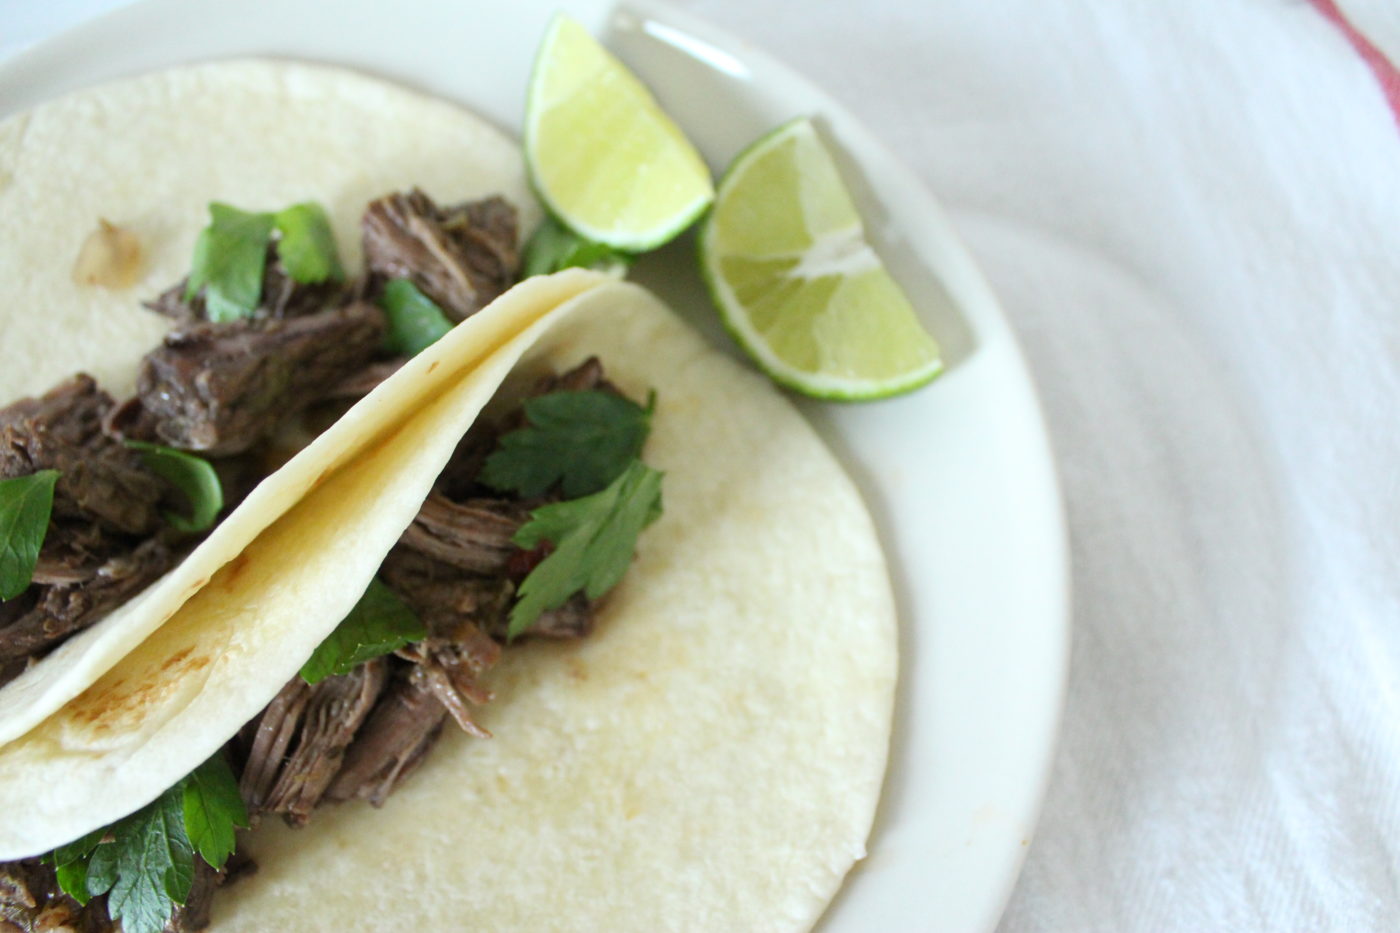 Slow cooker barbacoa is great for burritos, tacos or nachos. If you're like me, you'll have to stop yourself from just eating it out of the bowl.